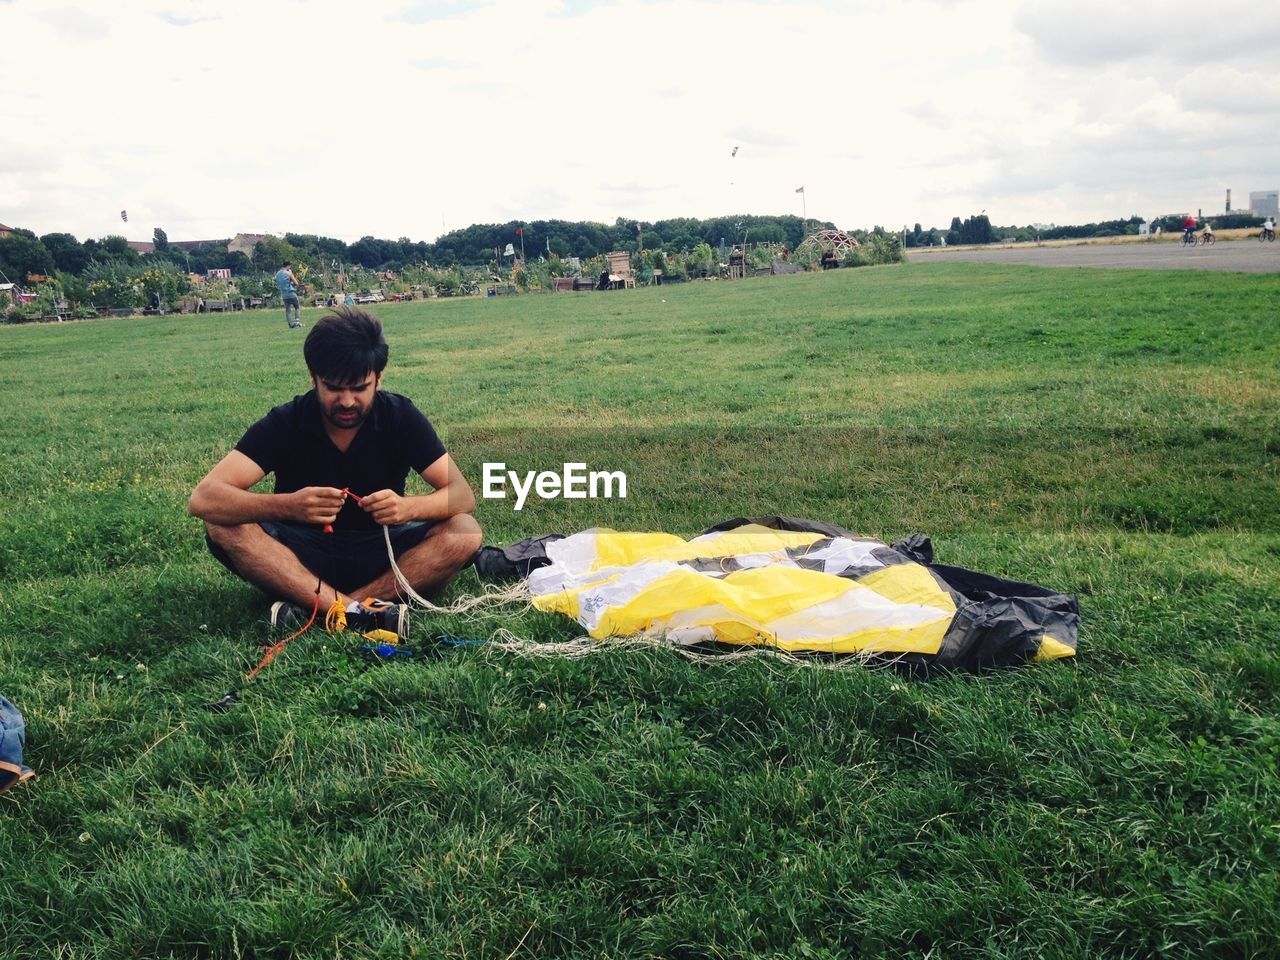 A young man prepares a parachute in an open field